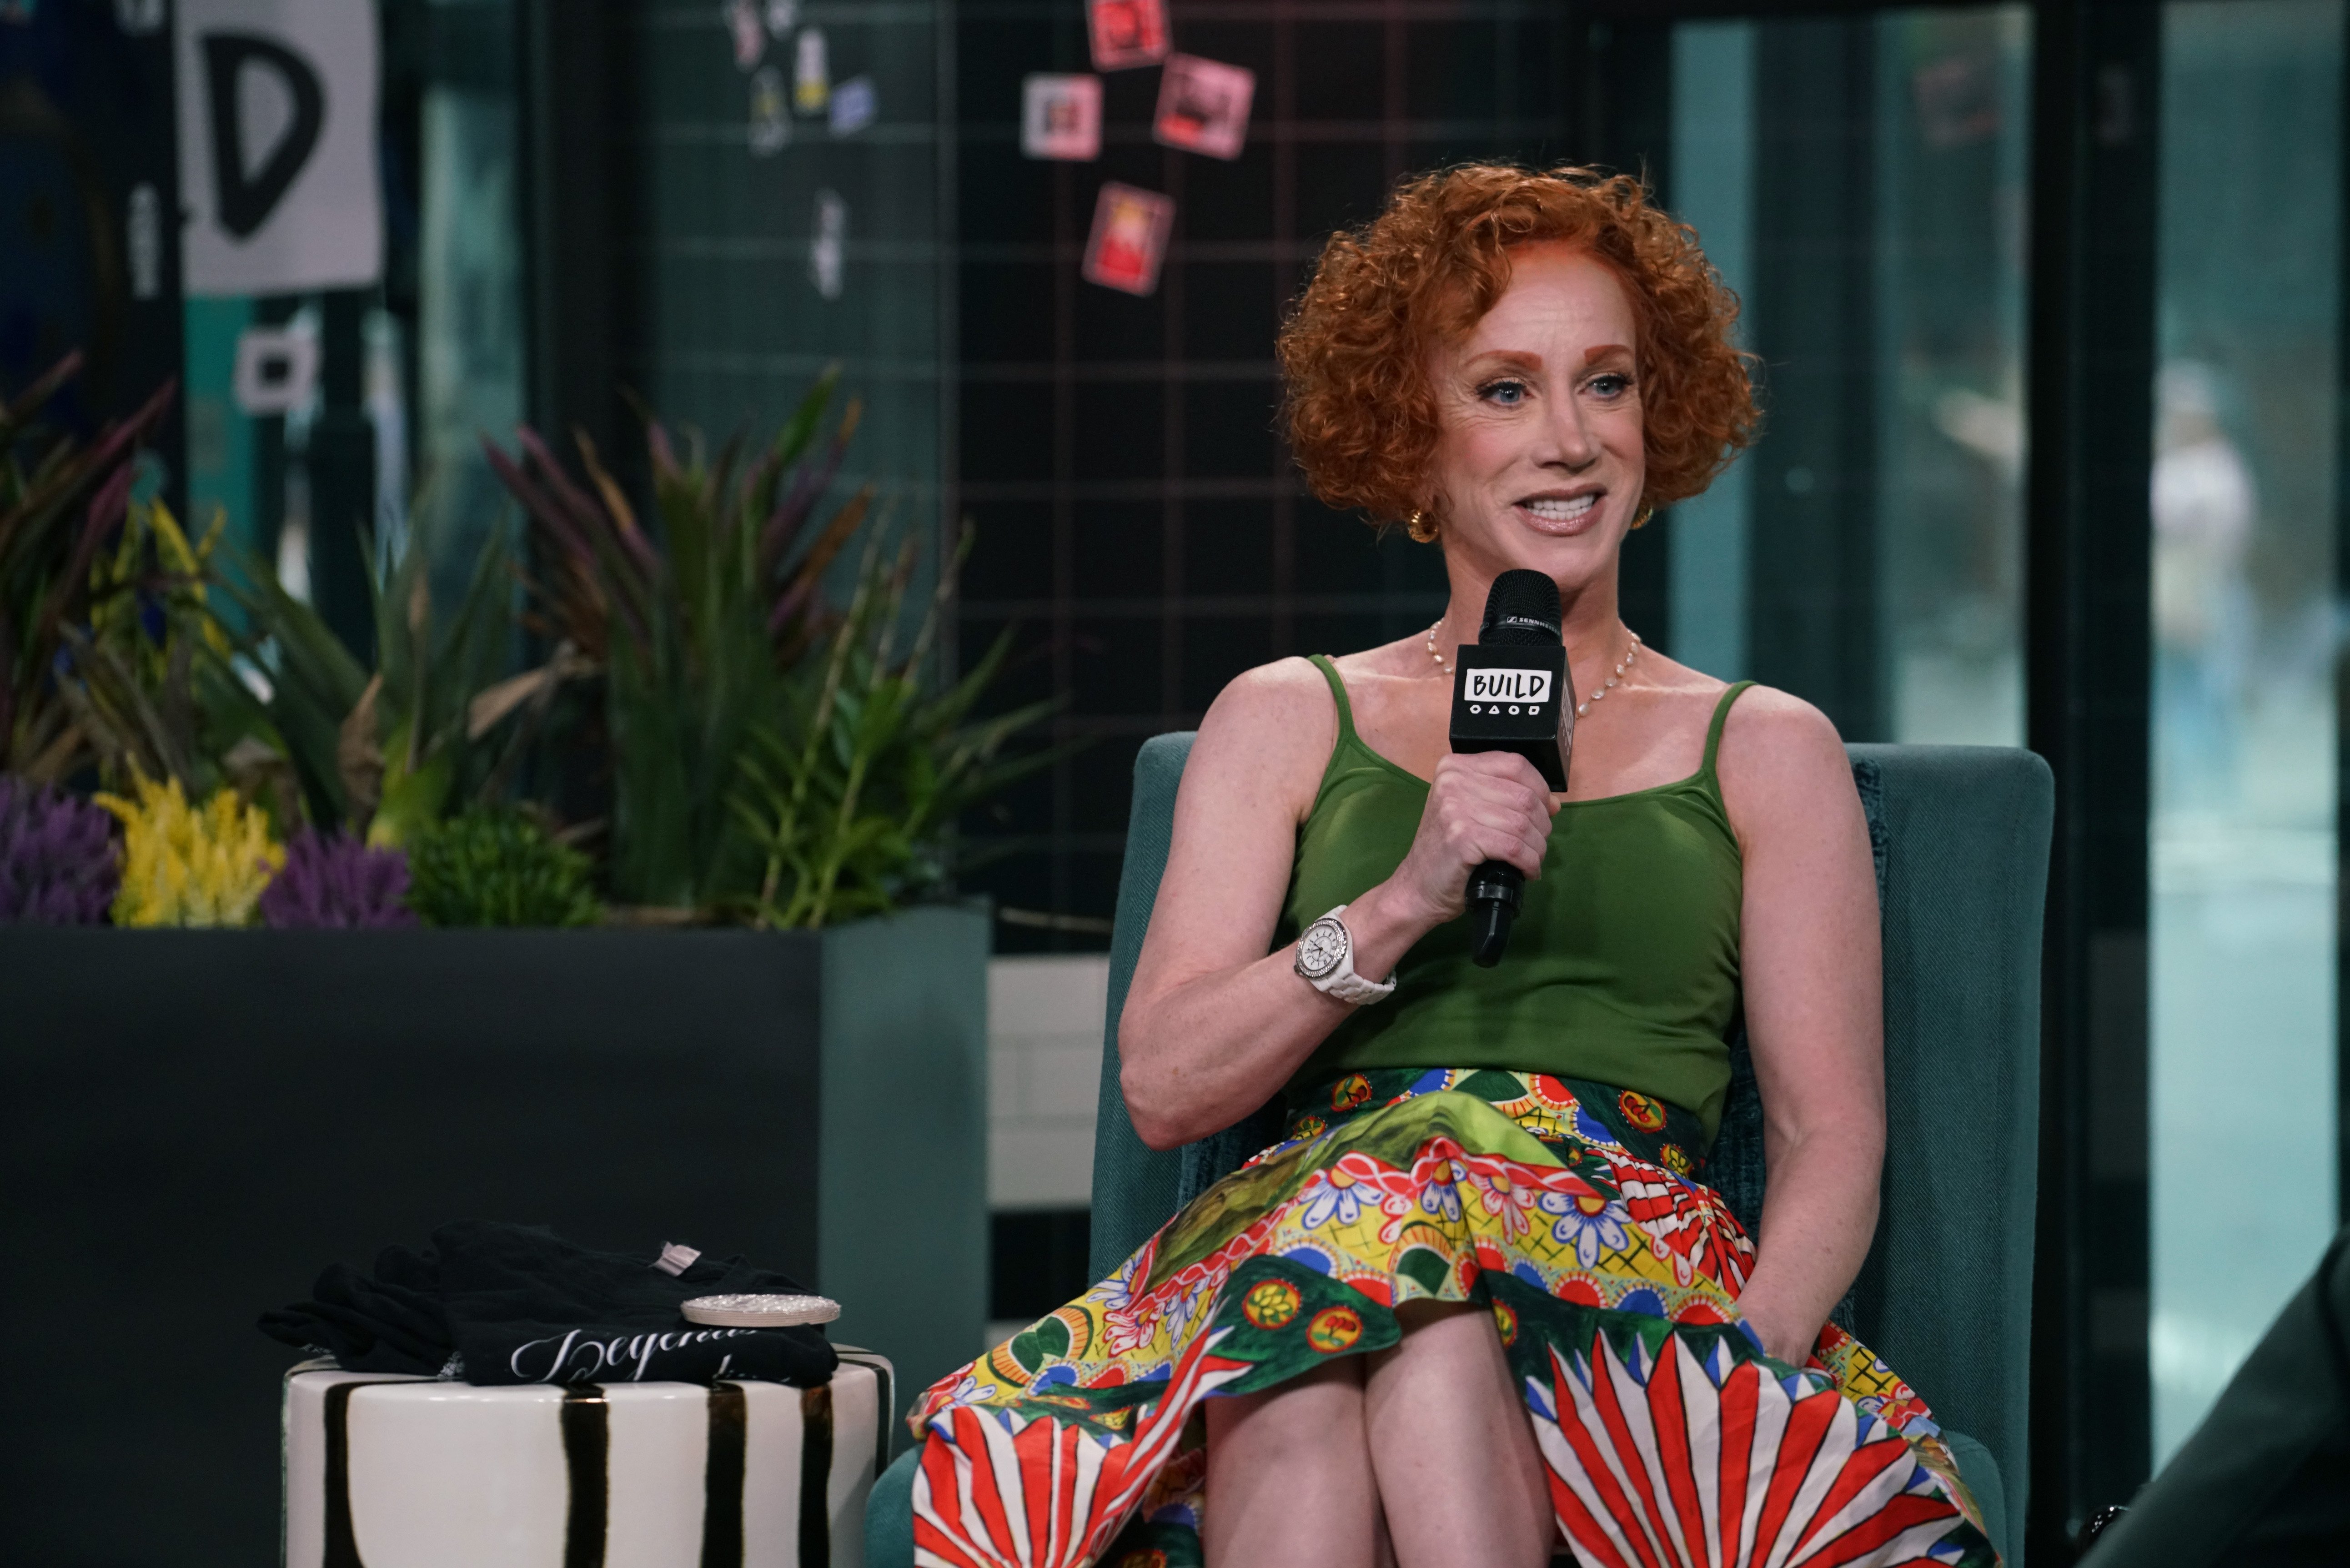 Kathy Griffin attends Build Series to talk about her new film 'Kathy Griffin: A Hell of a Story' at Build Studio on July 18, 2019 in New York City | Photo: Getty Images